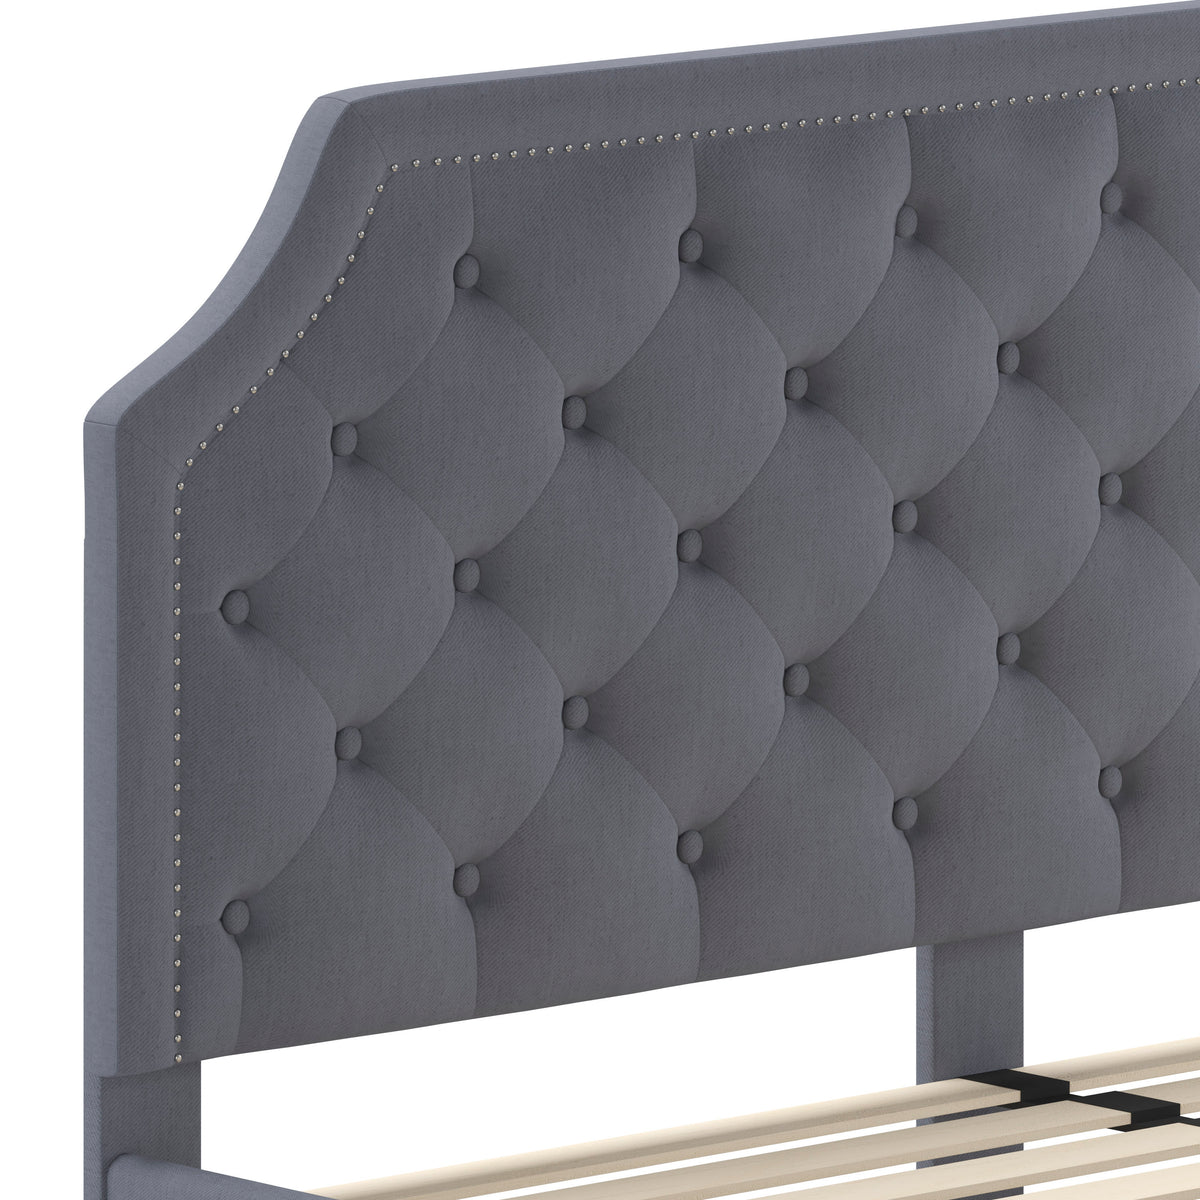 Light Gray,King |#| King Size Arched Tufted Upholstered Platform Bed in Light Gray Fabric